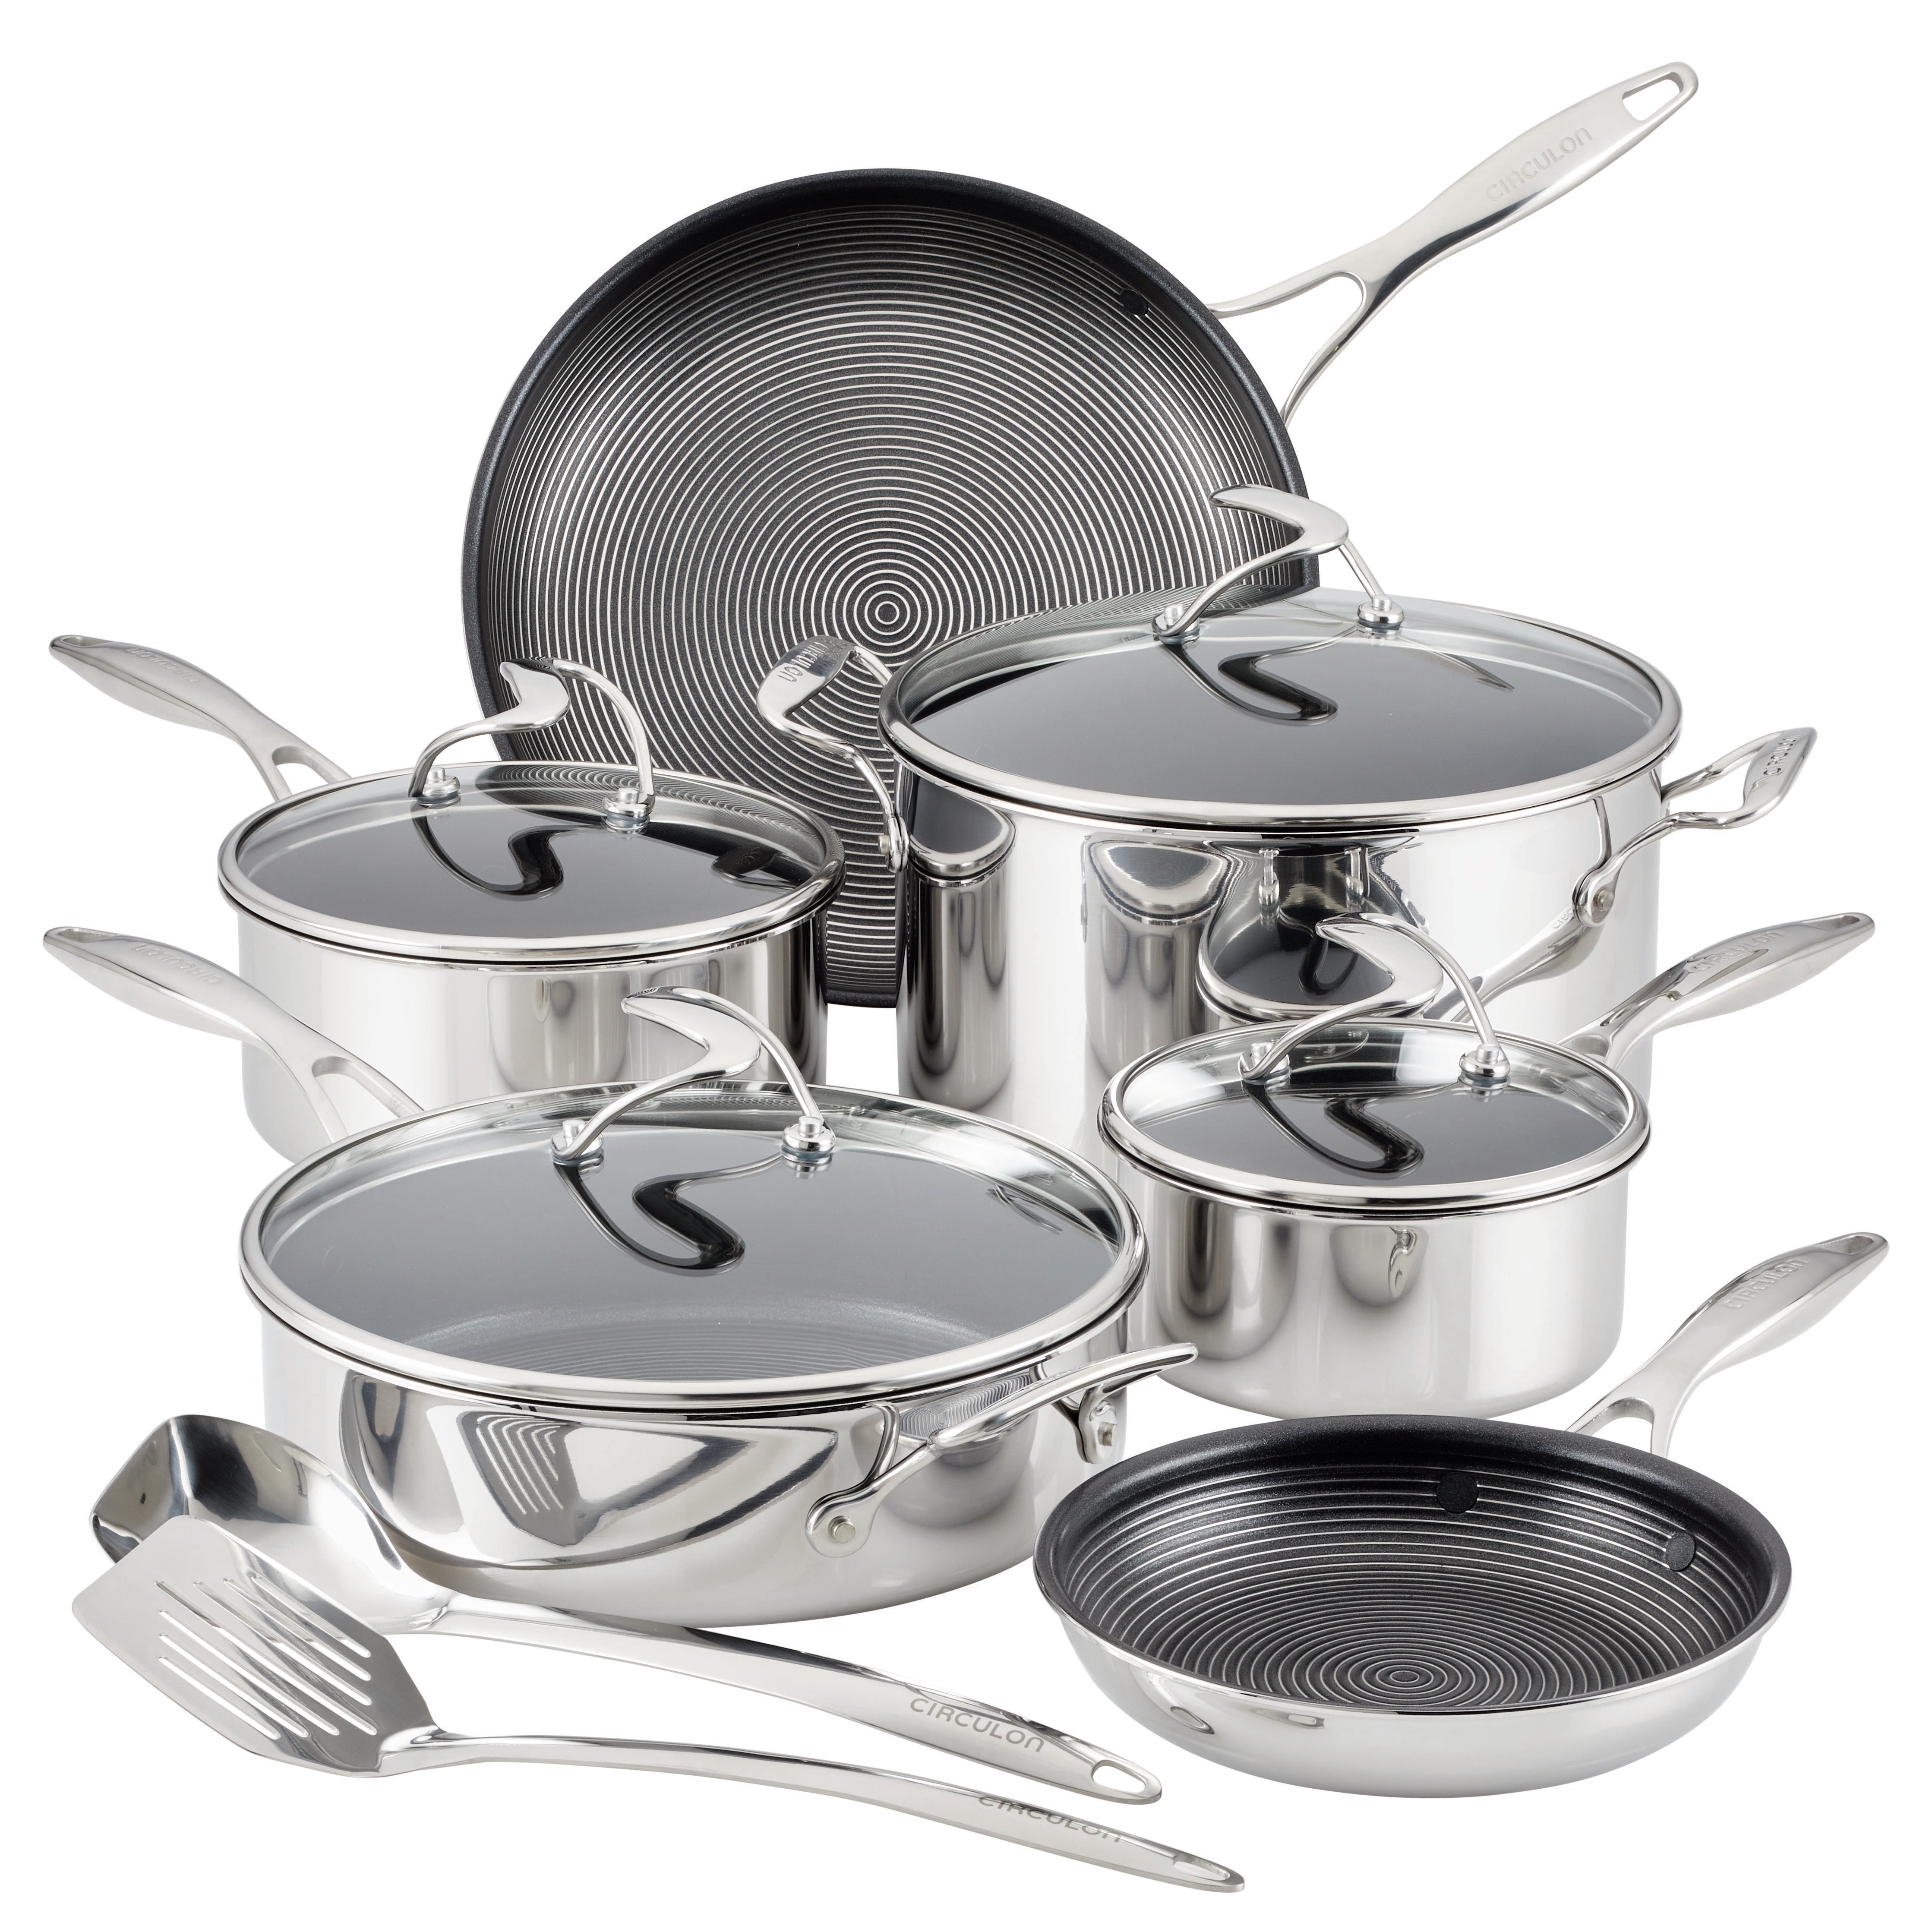 SteelShield C-Series 10pc Stainless Steel Cookware Set